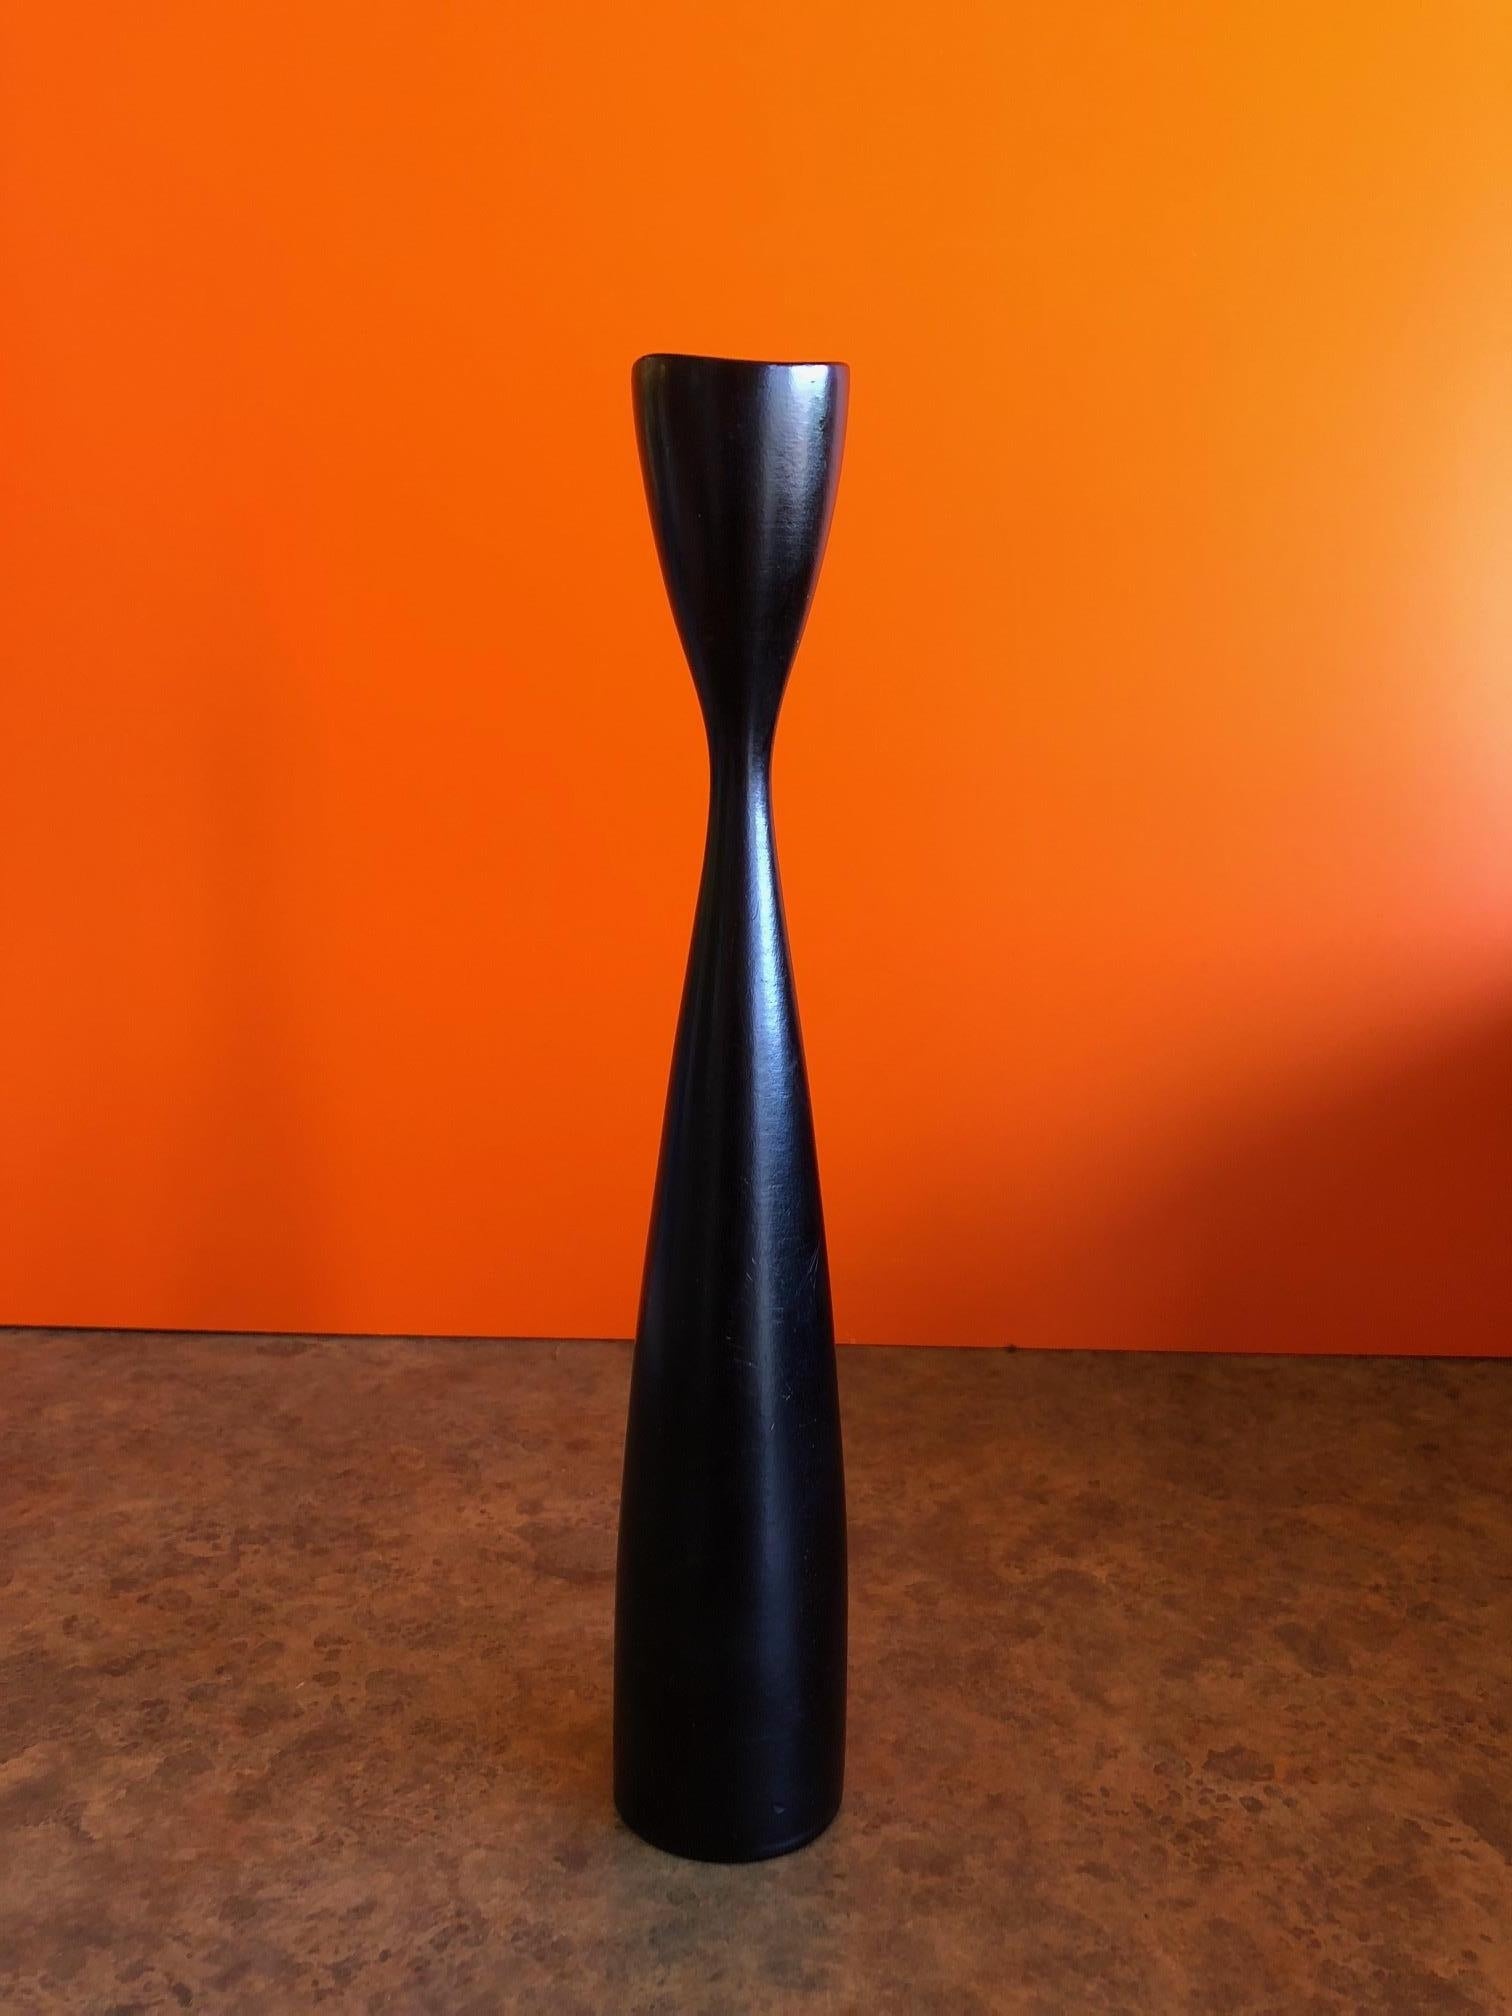 A single and elegant Danish wood candlestick, circa 1960s. The piece is 11